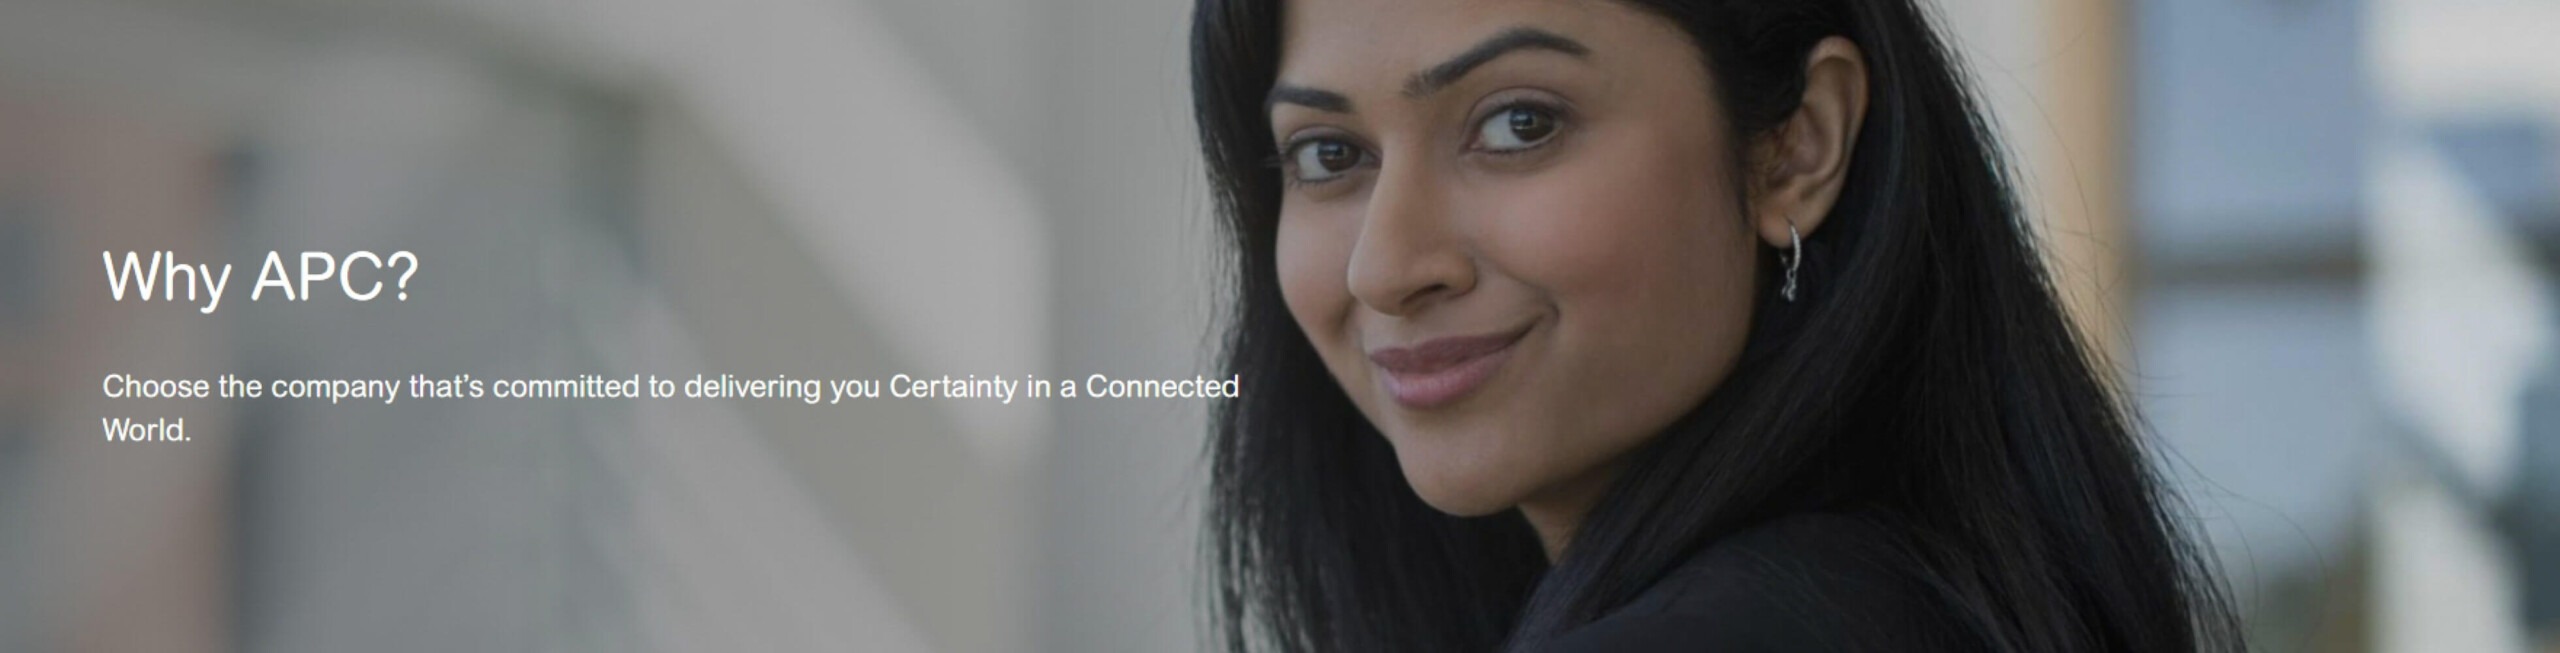 Why APC? Choose the company that's committed to delivering you Certainty in a Connected World